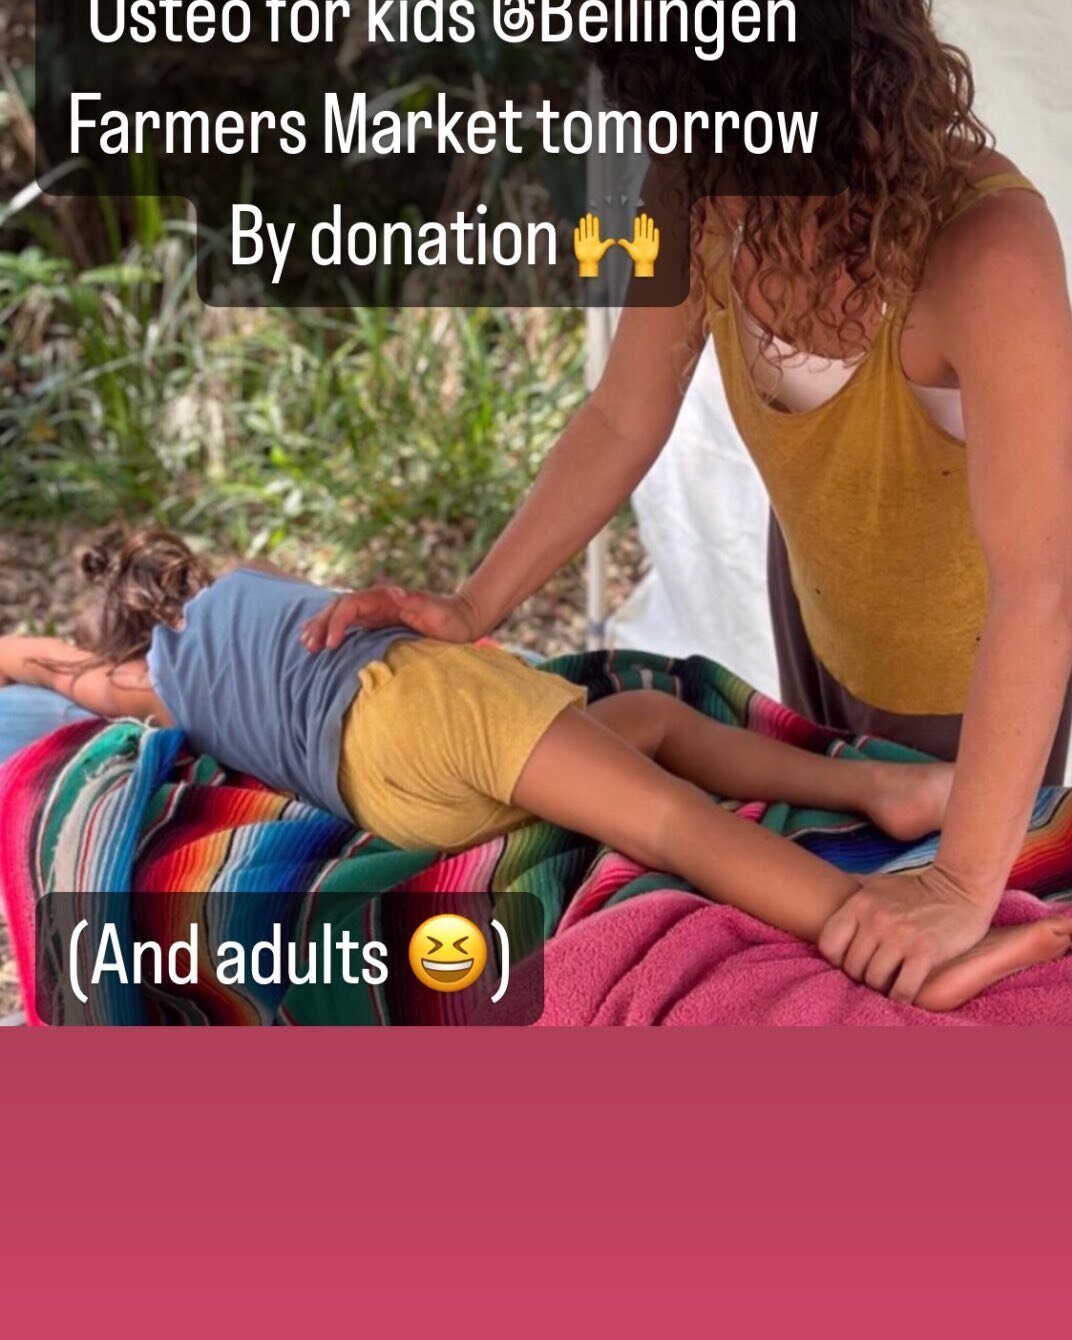 I&rsquo;ll be offering Osteo for kids again at Bellingen Farmers Market tomorrow. Come on down and I&rsquo;ll tell you what  osteopathy can do for you children